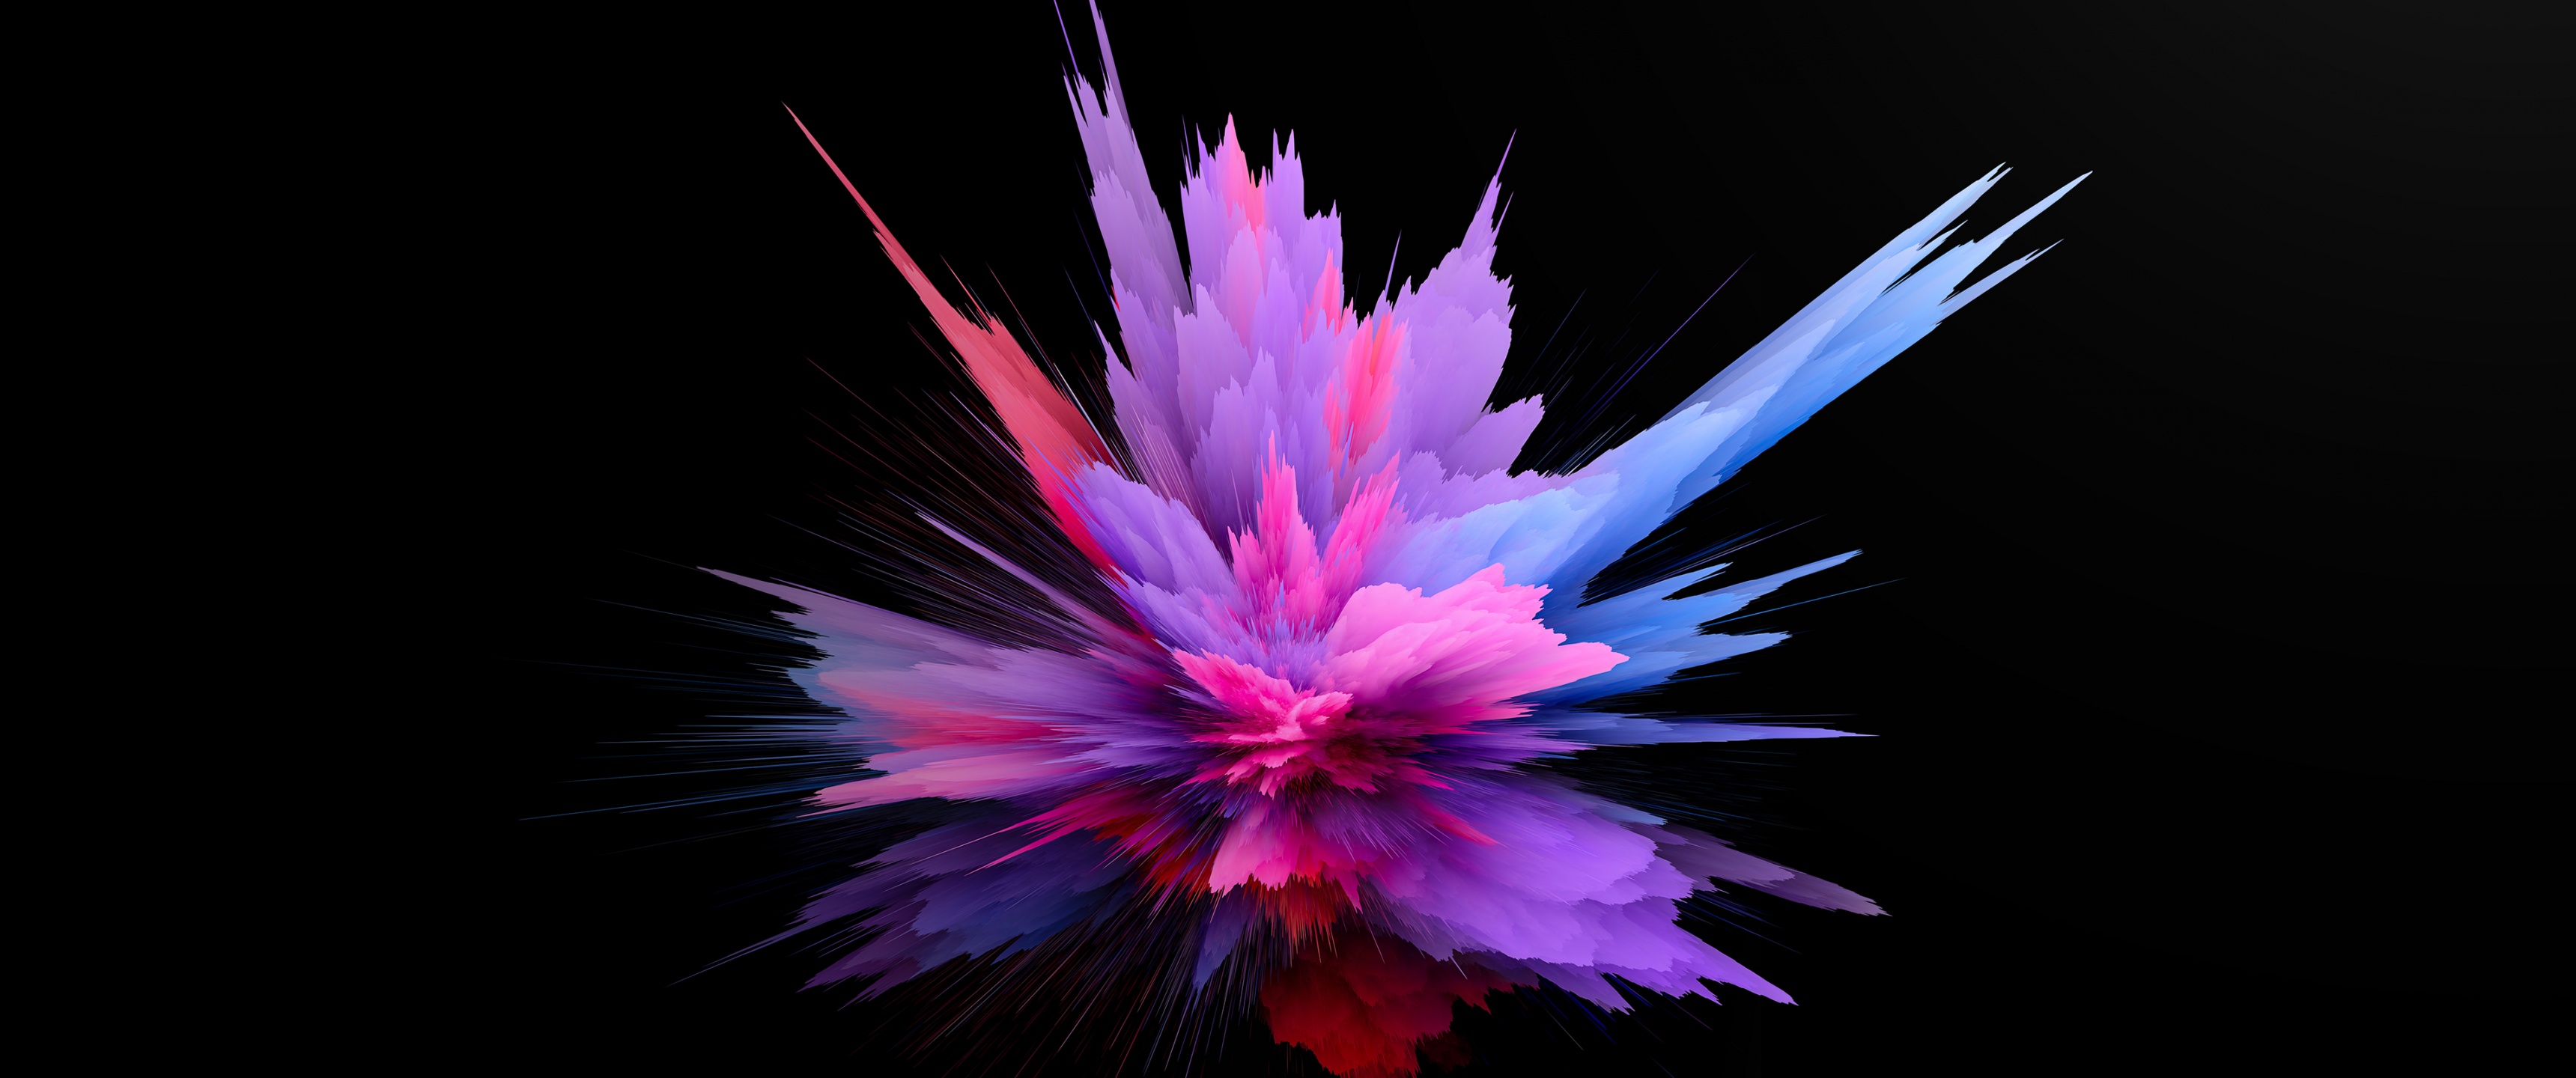 Color burst Wallpaper 4K, Colorful, Explosion, Abstract, #6671